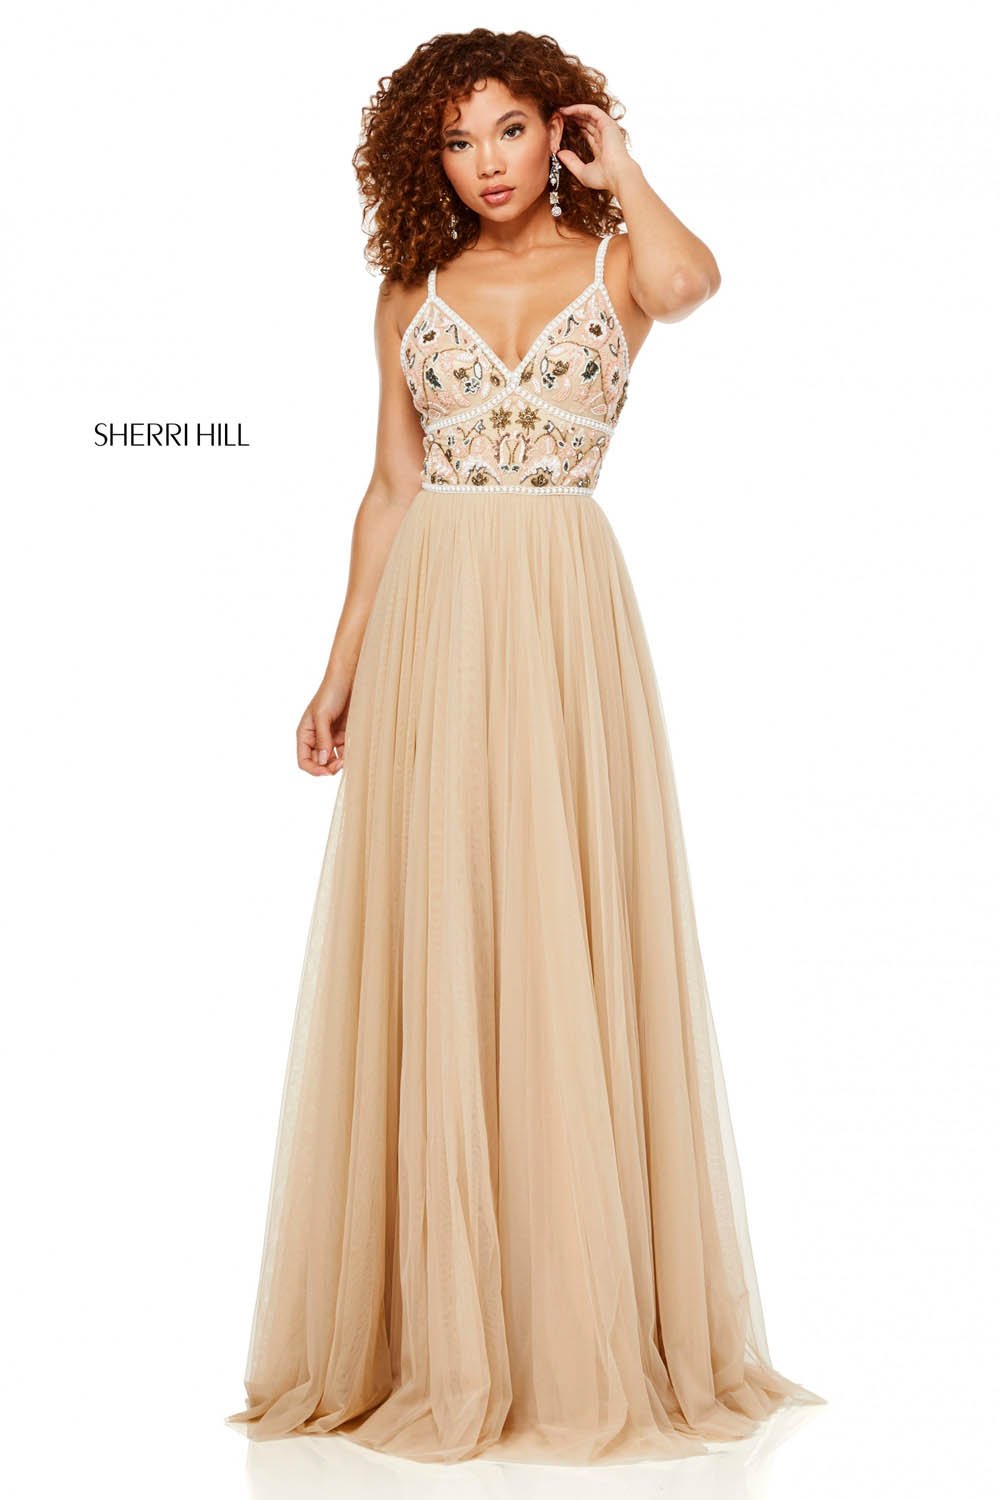 Sherri Hill 52523 dress images in these colors: Nude Mulighti.